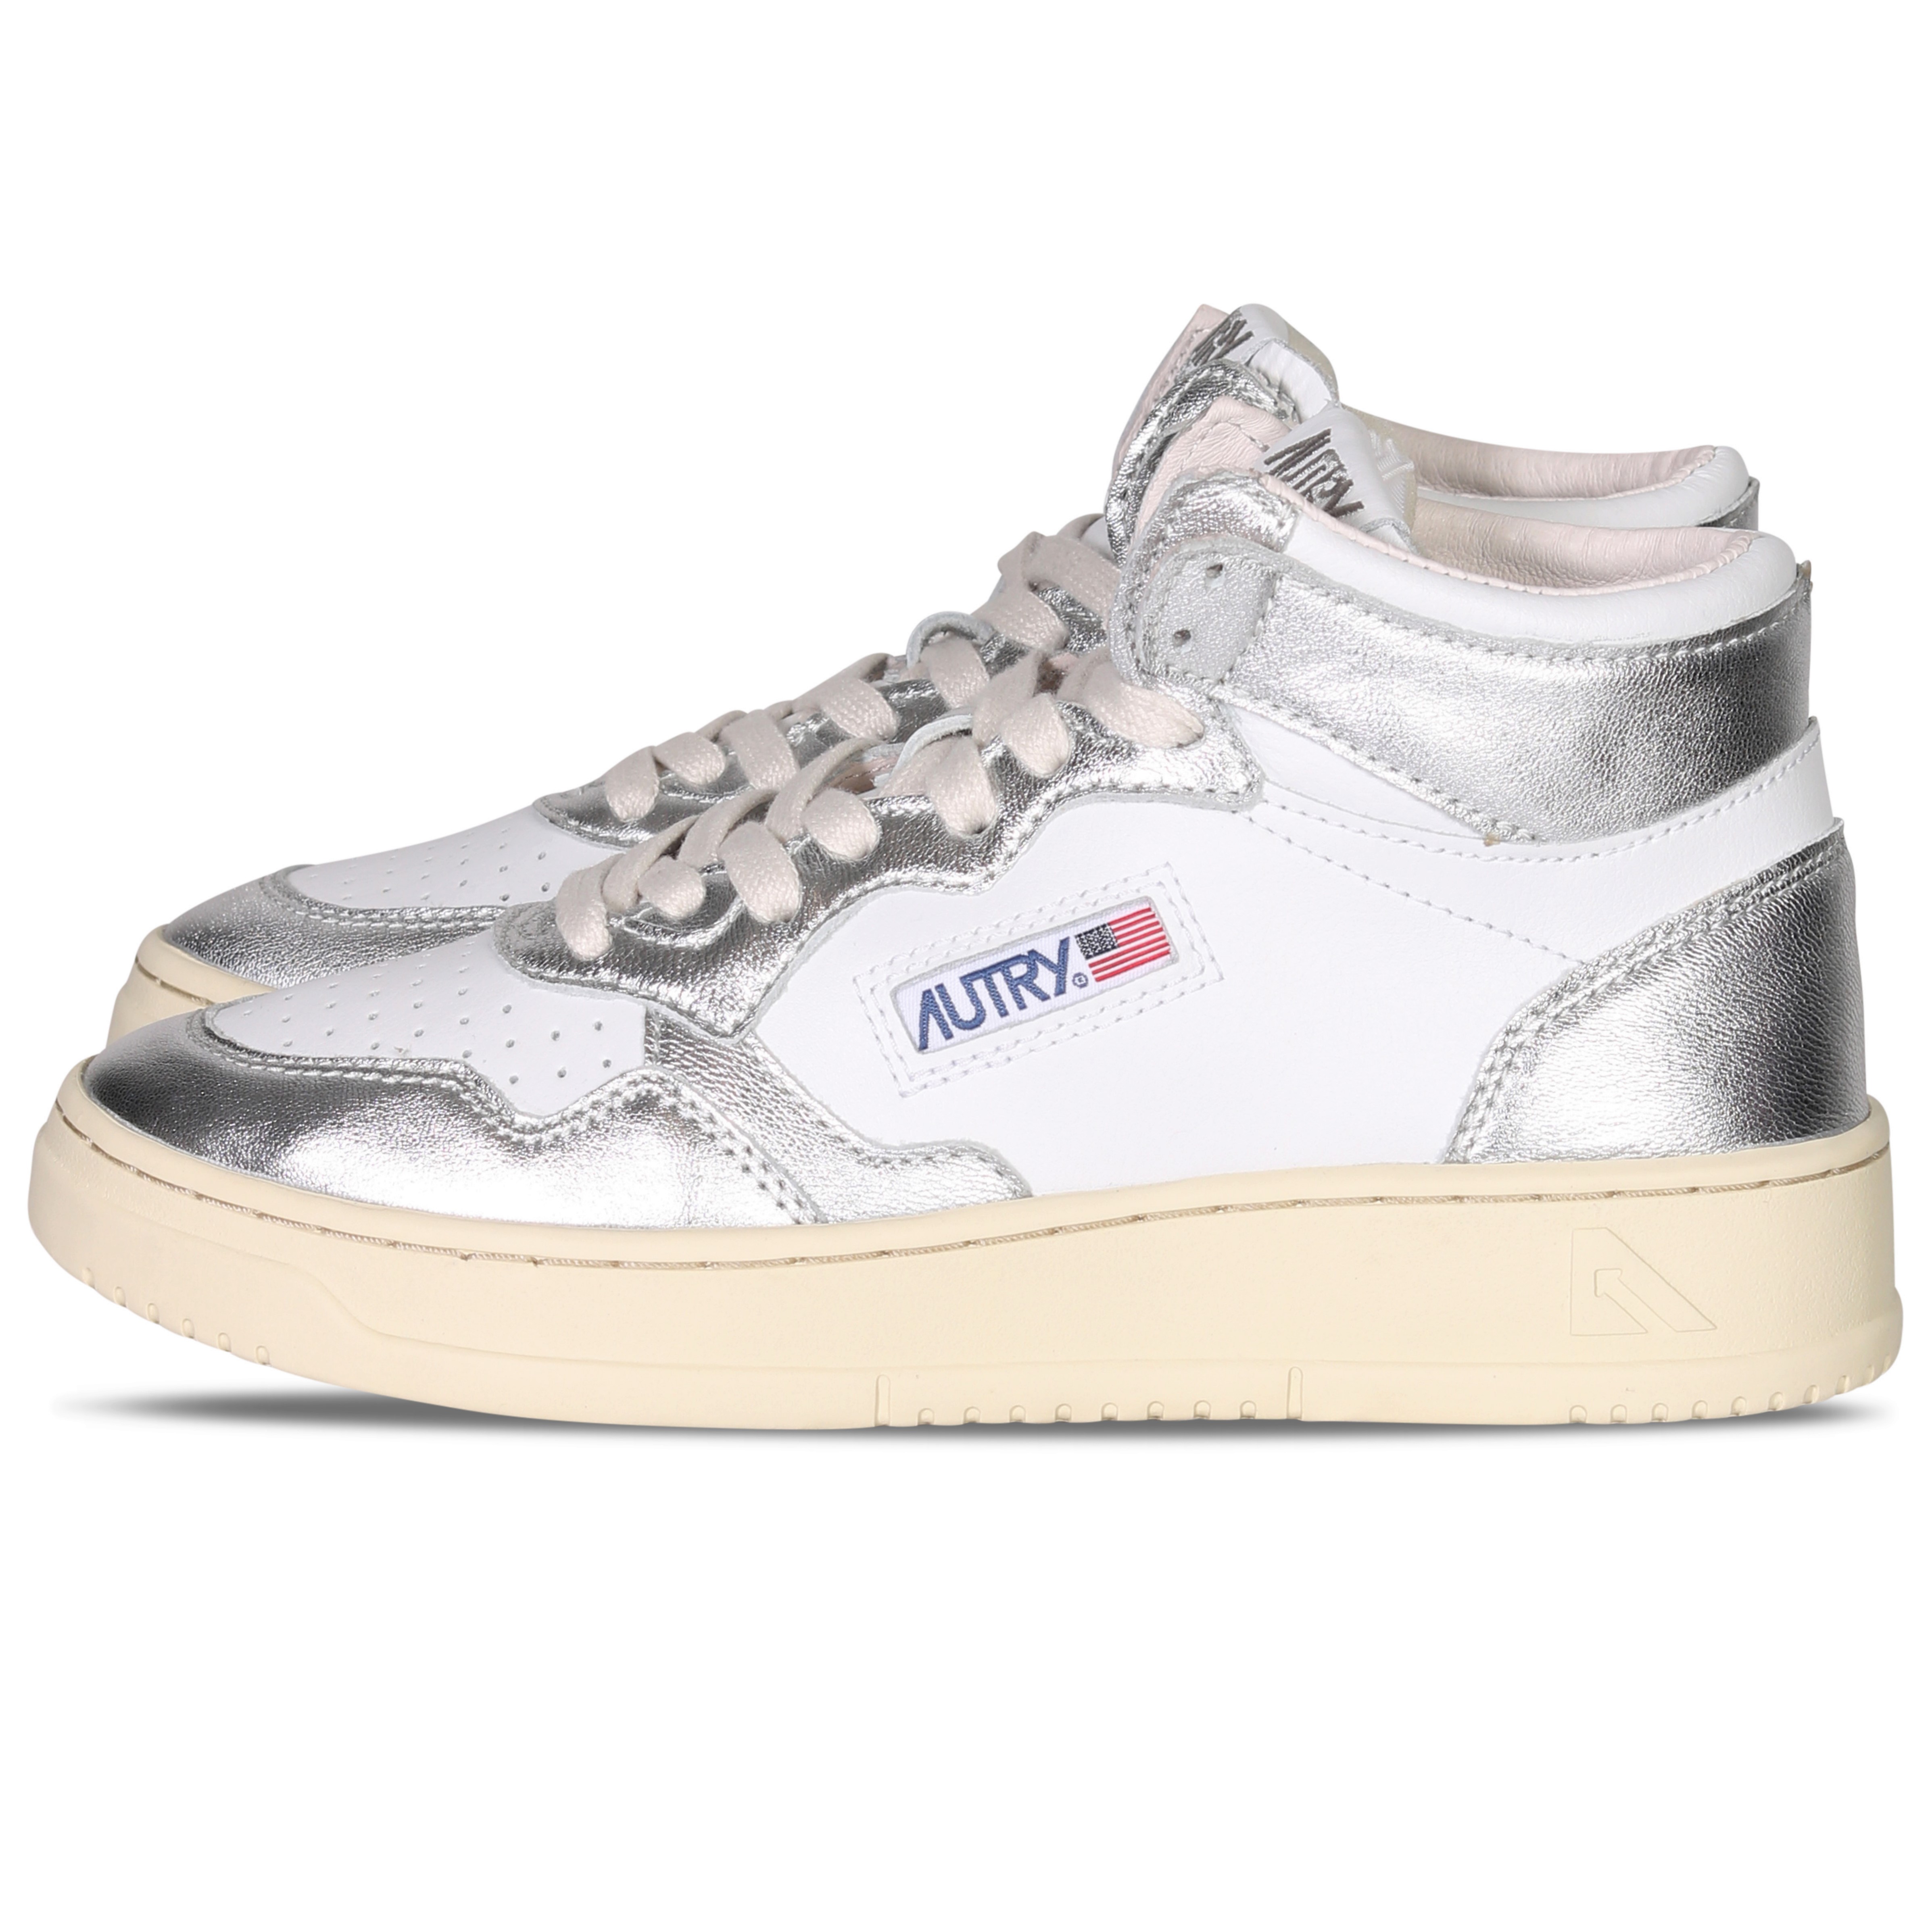 Autry Action Shoes Mid Sneaker White/Silver